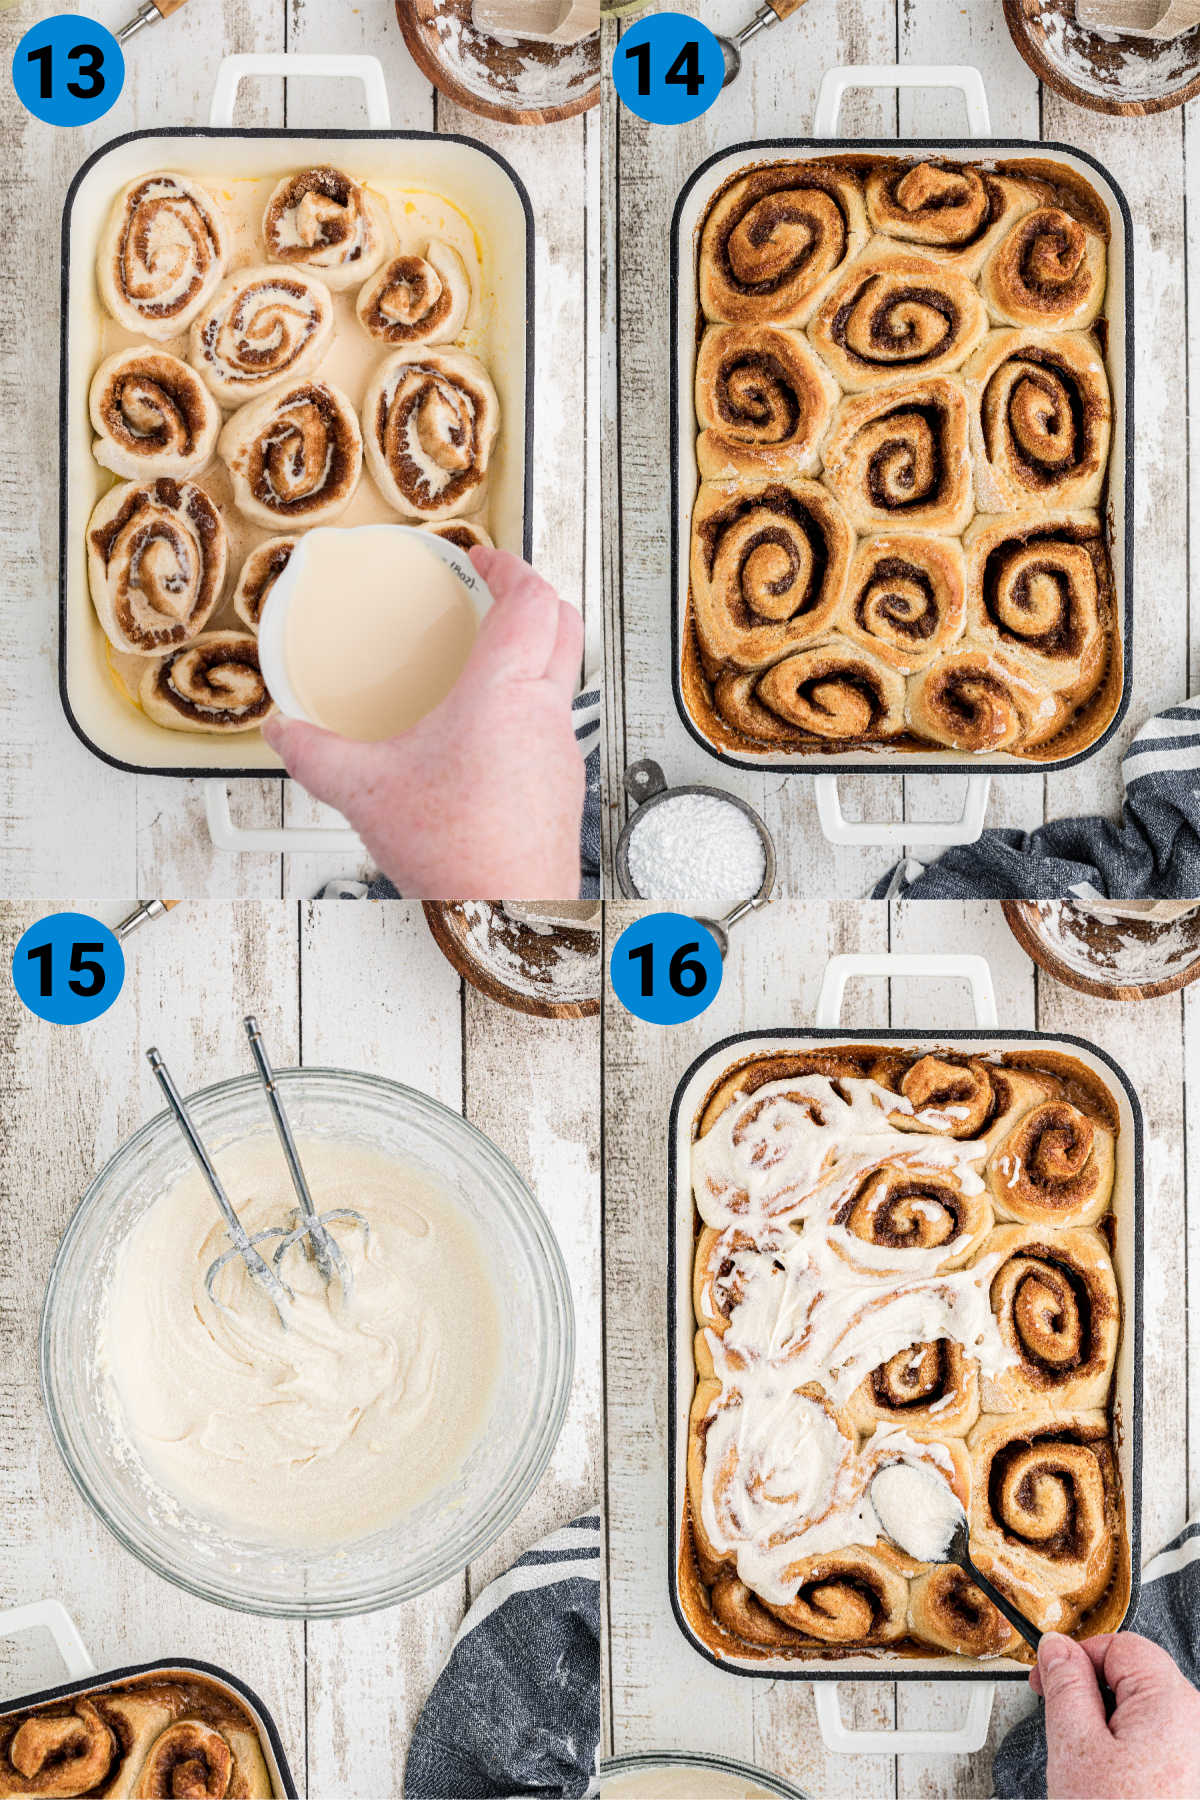 A collage of four images showing how to make Amish Cinnamon rolls, steps 13-16